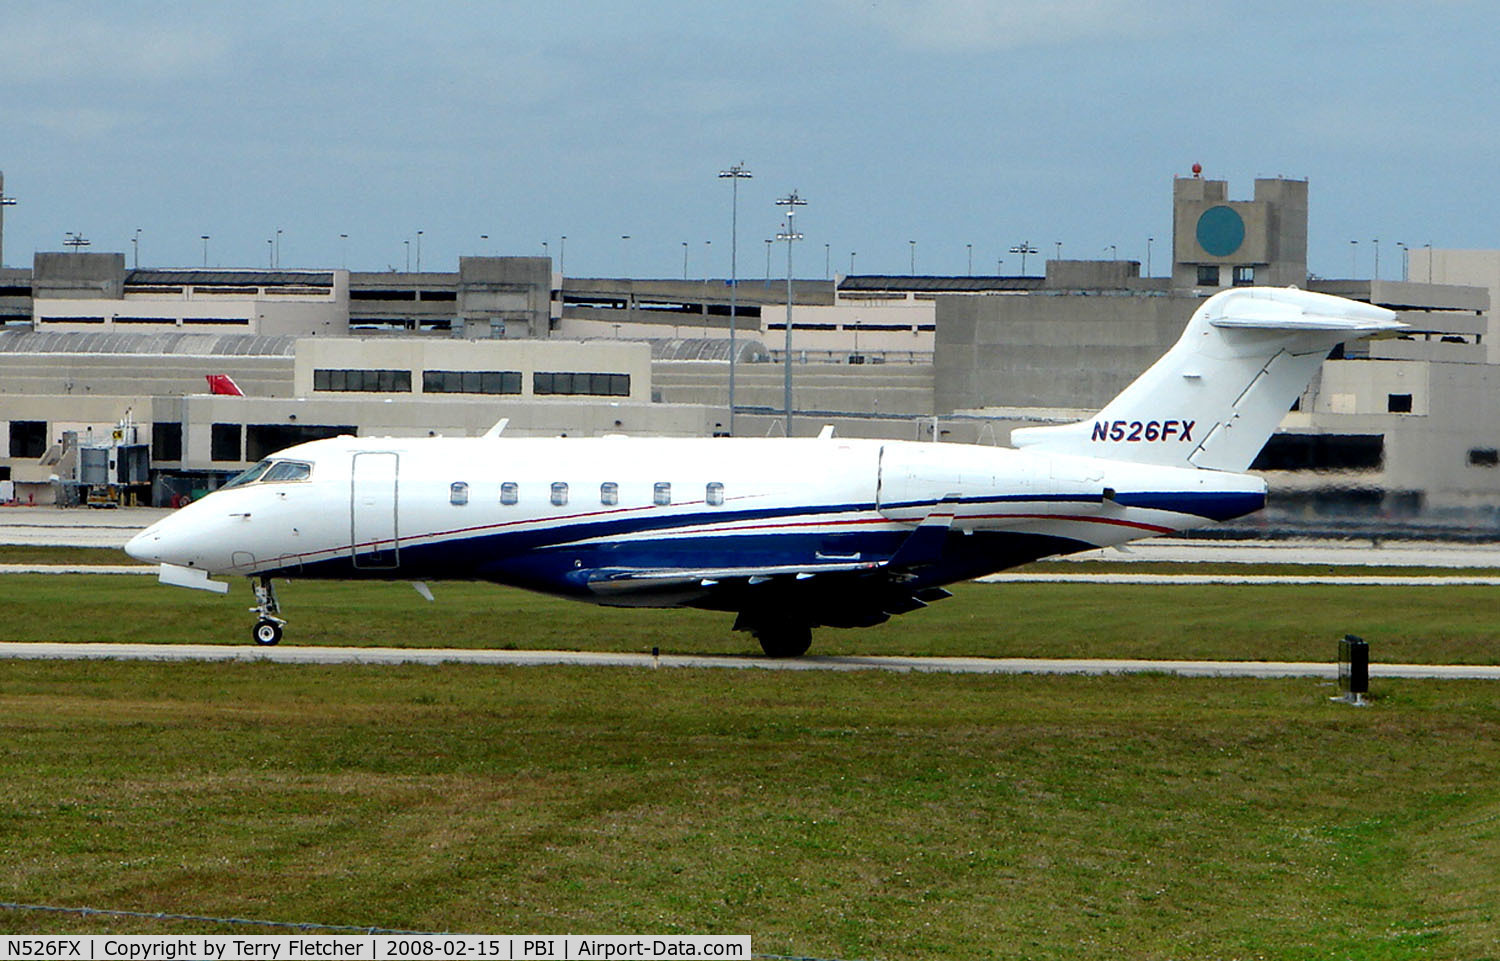 N526FX, 2006 Bombardier Challenger 300 (BD-100-1A10) C/N 20118, The business aircraft traffic at West Palm Beach on the Friday before President's Day always provides the aviation enthusiast / photographer with a treat